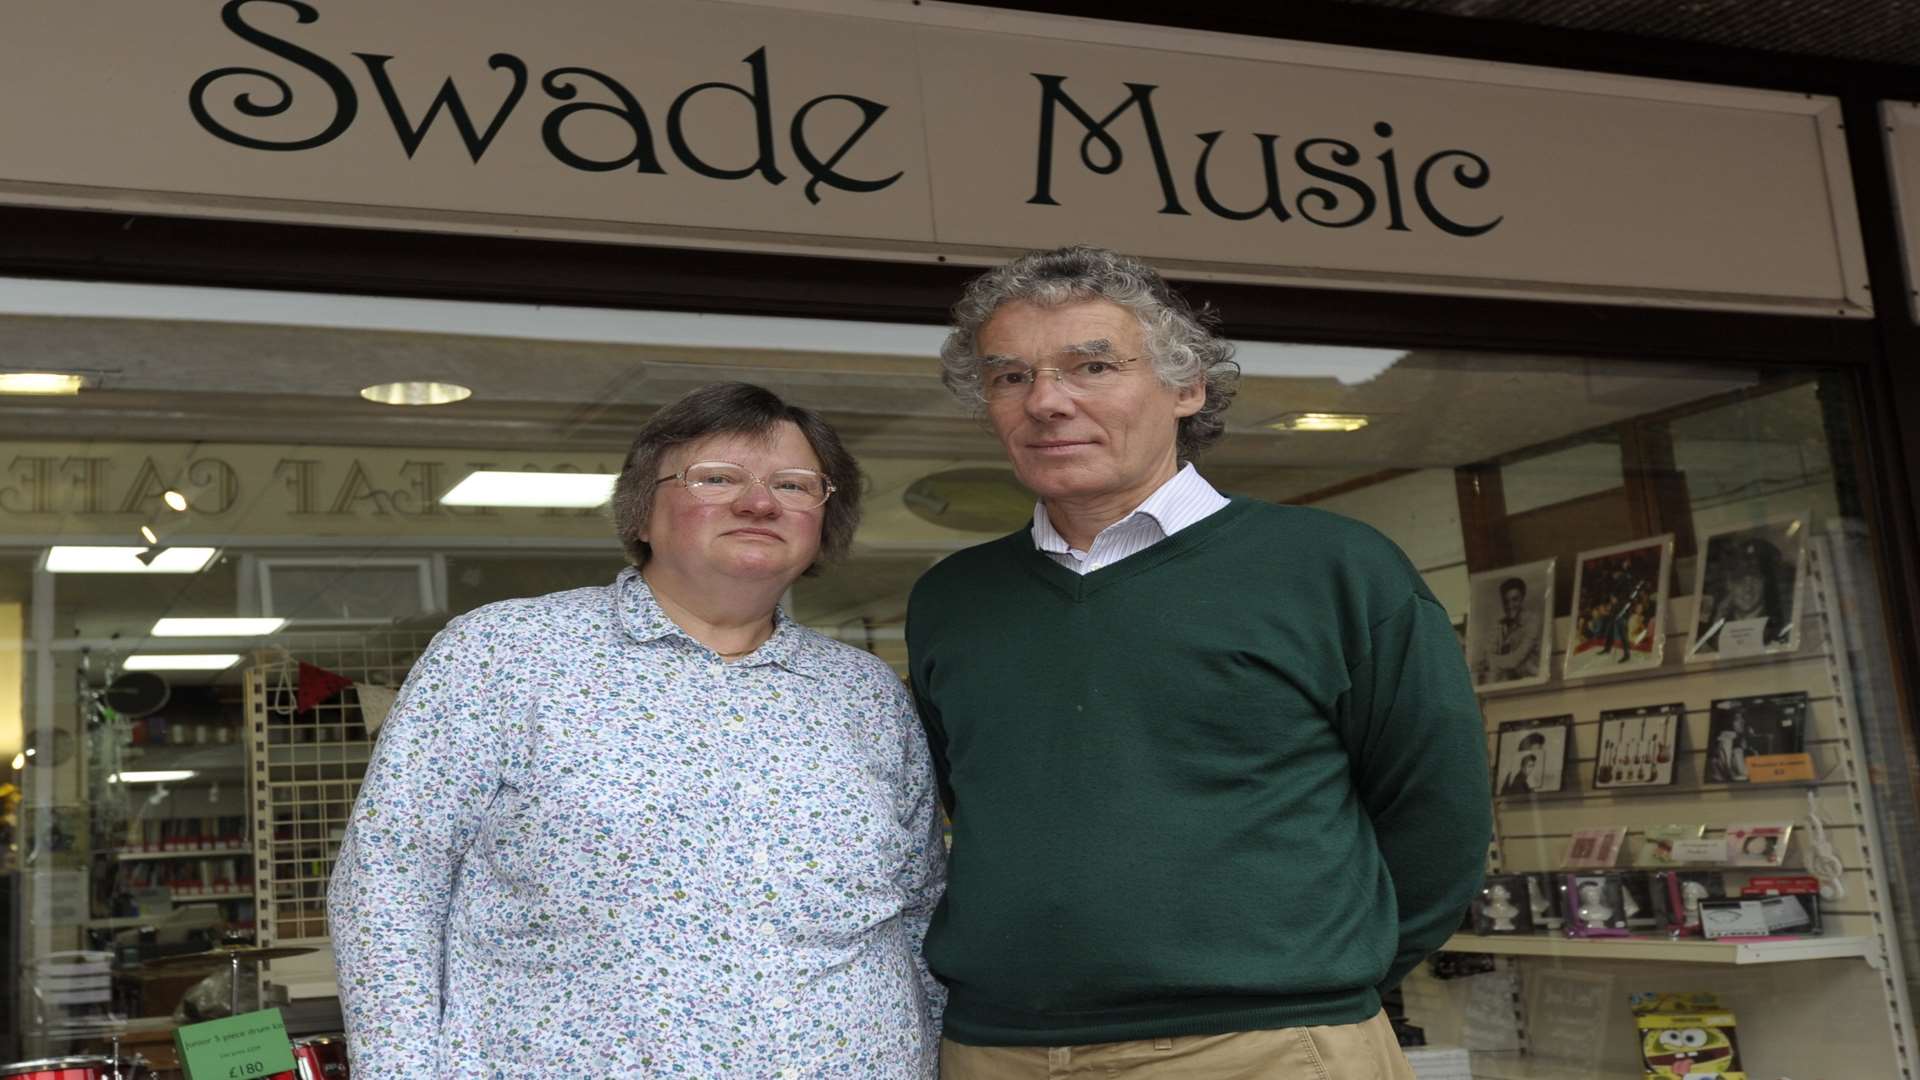 Robert and Cynthia Swade have decided to call it a day with their business Swade Music in Roman Square, Sittingbourne